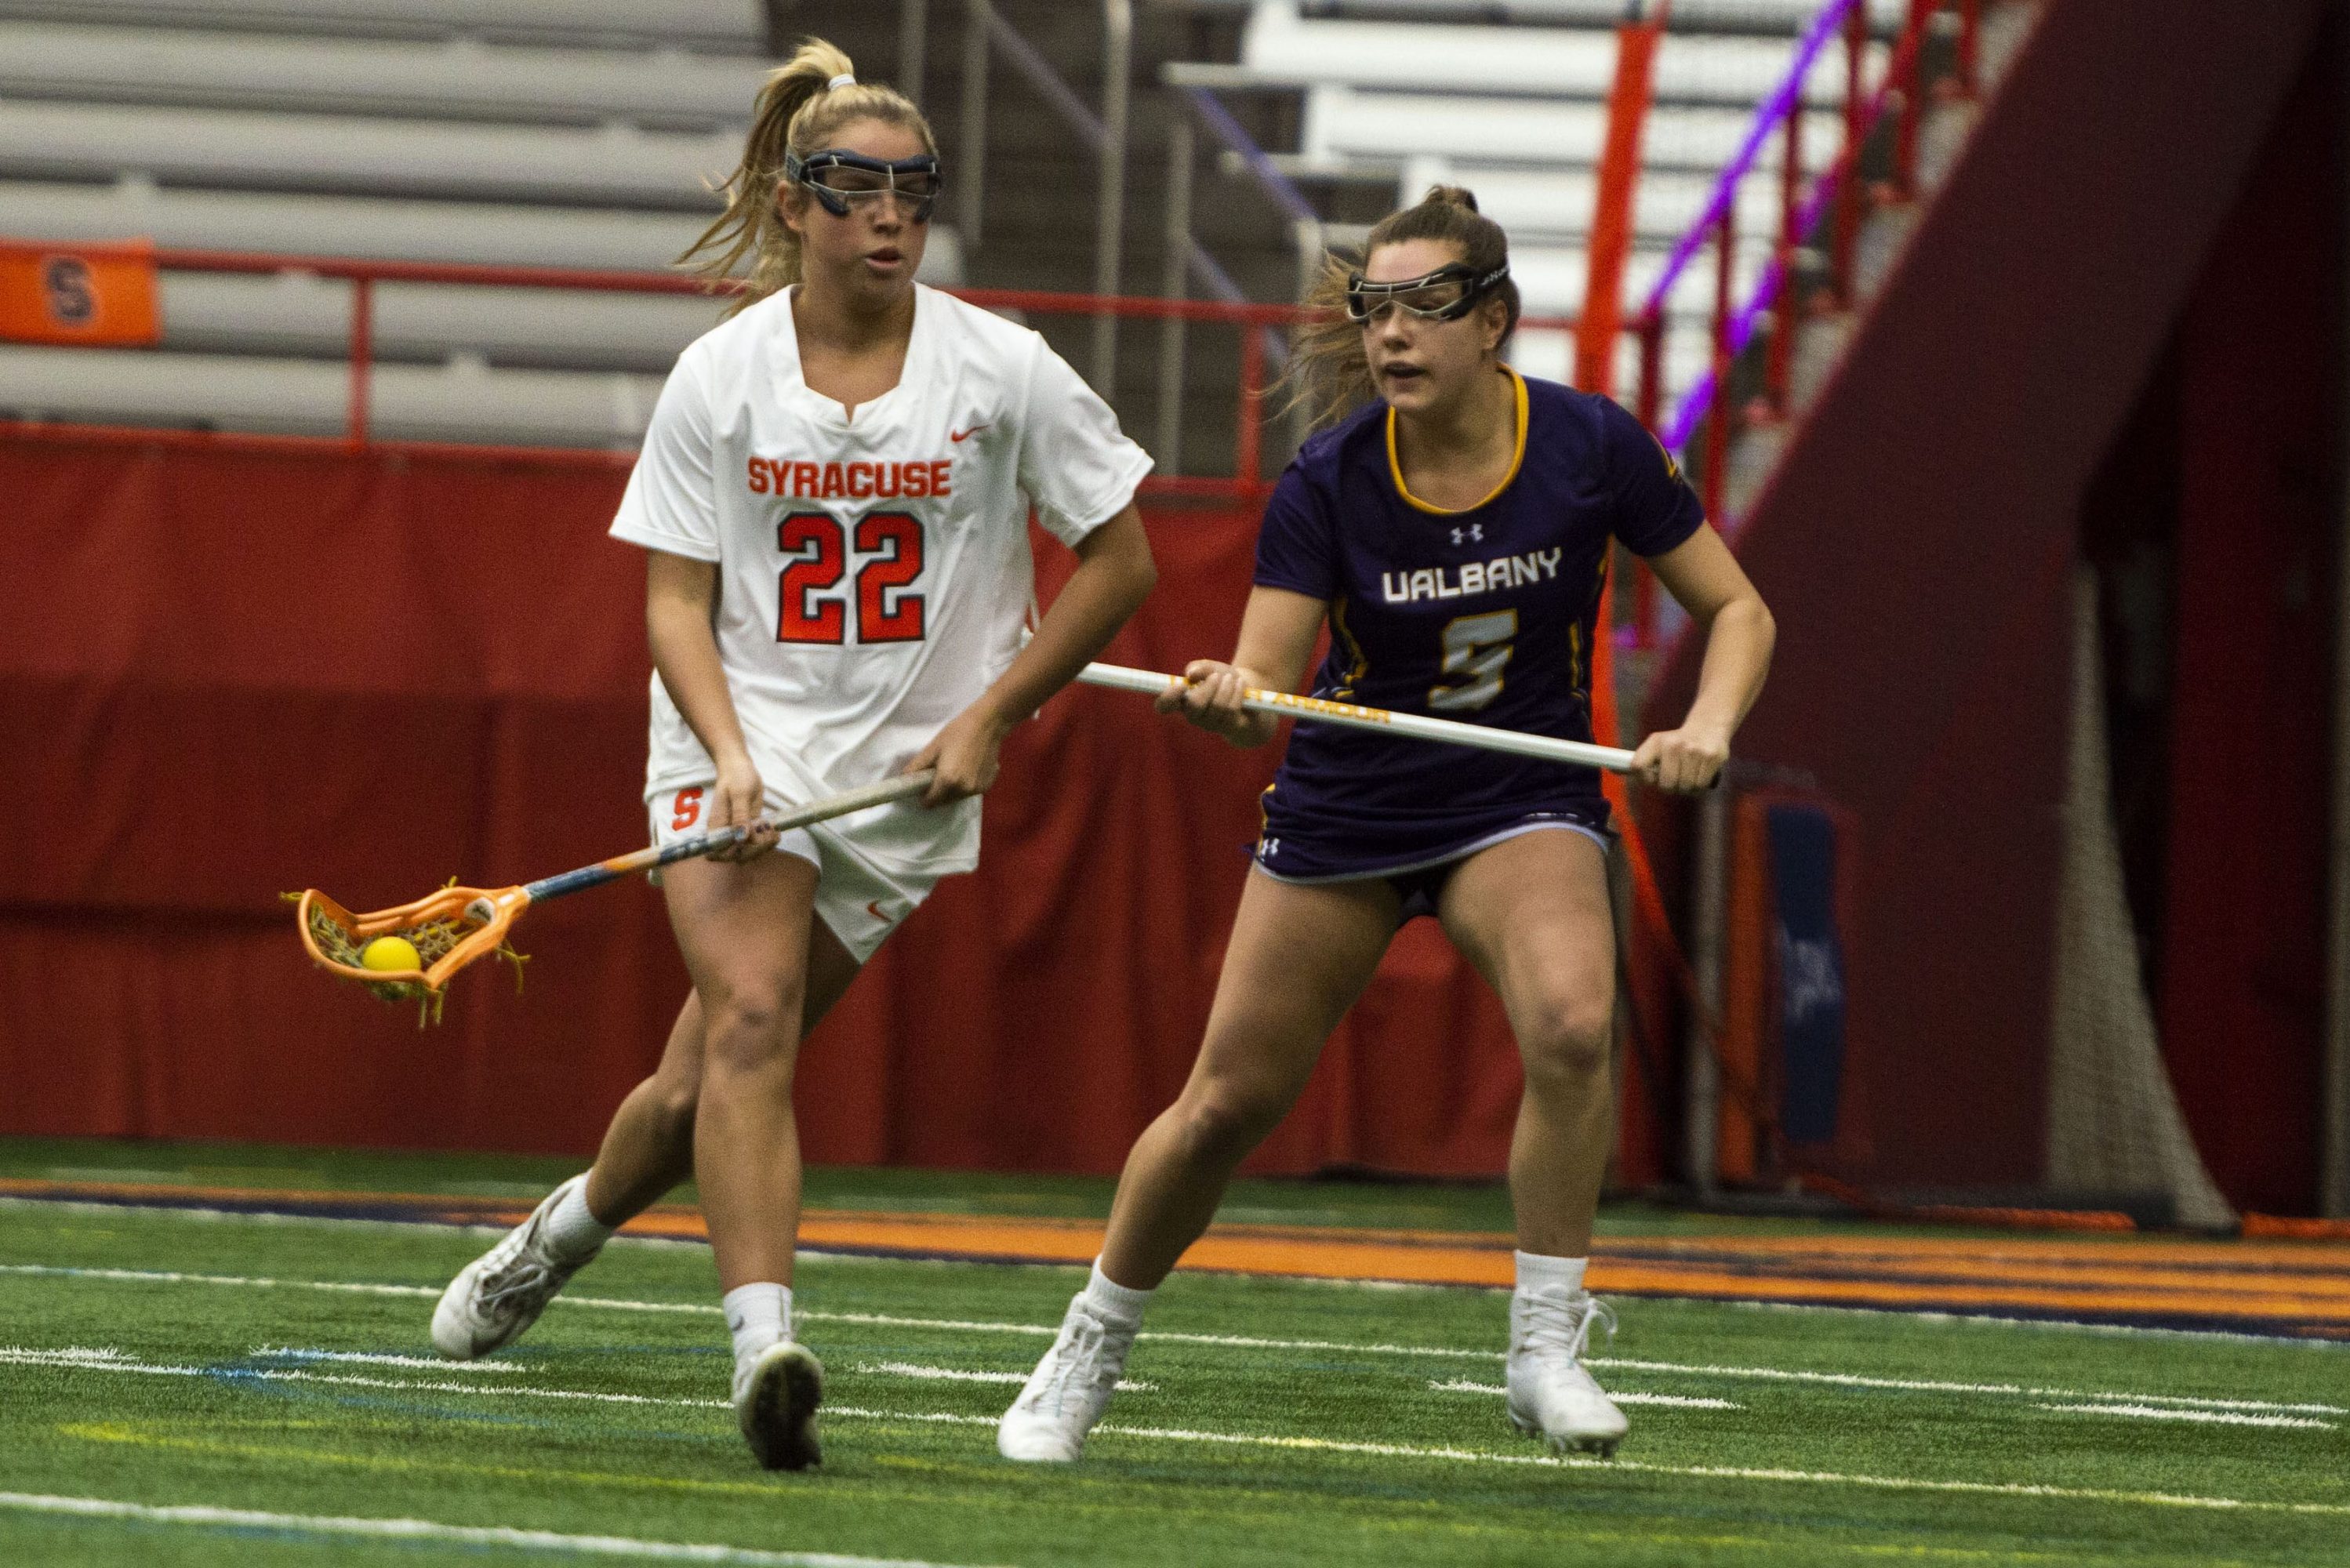 Megan Carney looks to a teammate as Albany's Kyla Zapolski defends during Saturday's game in the Carrier Dome.